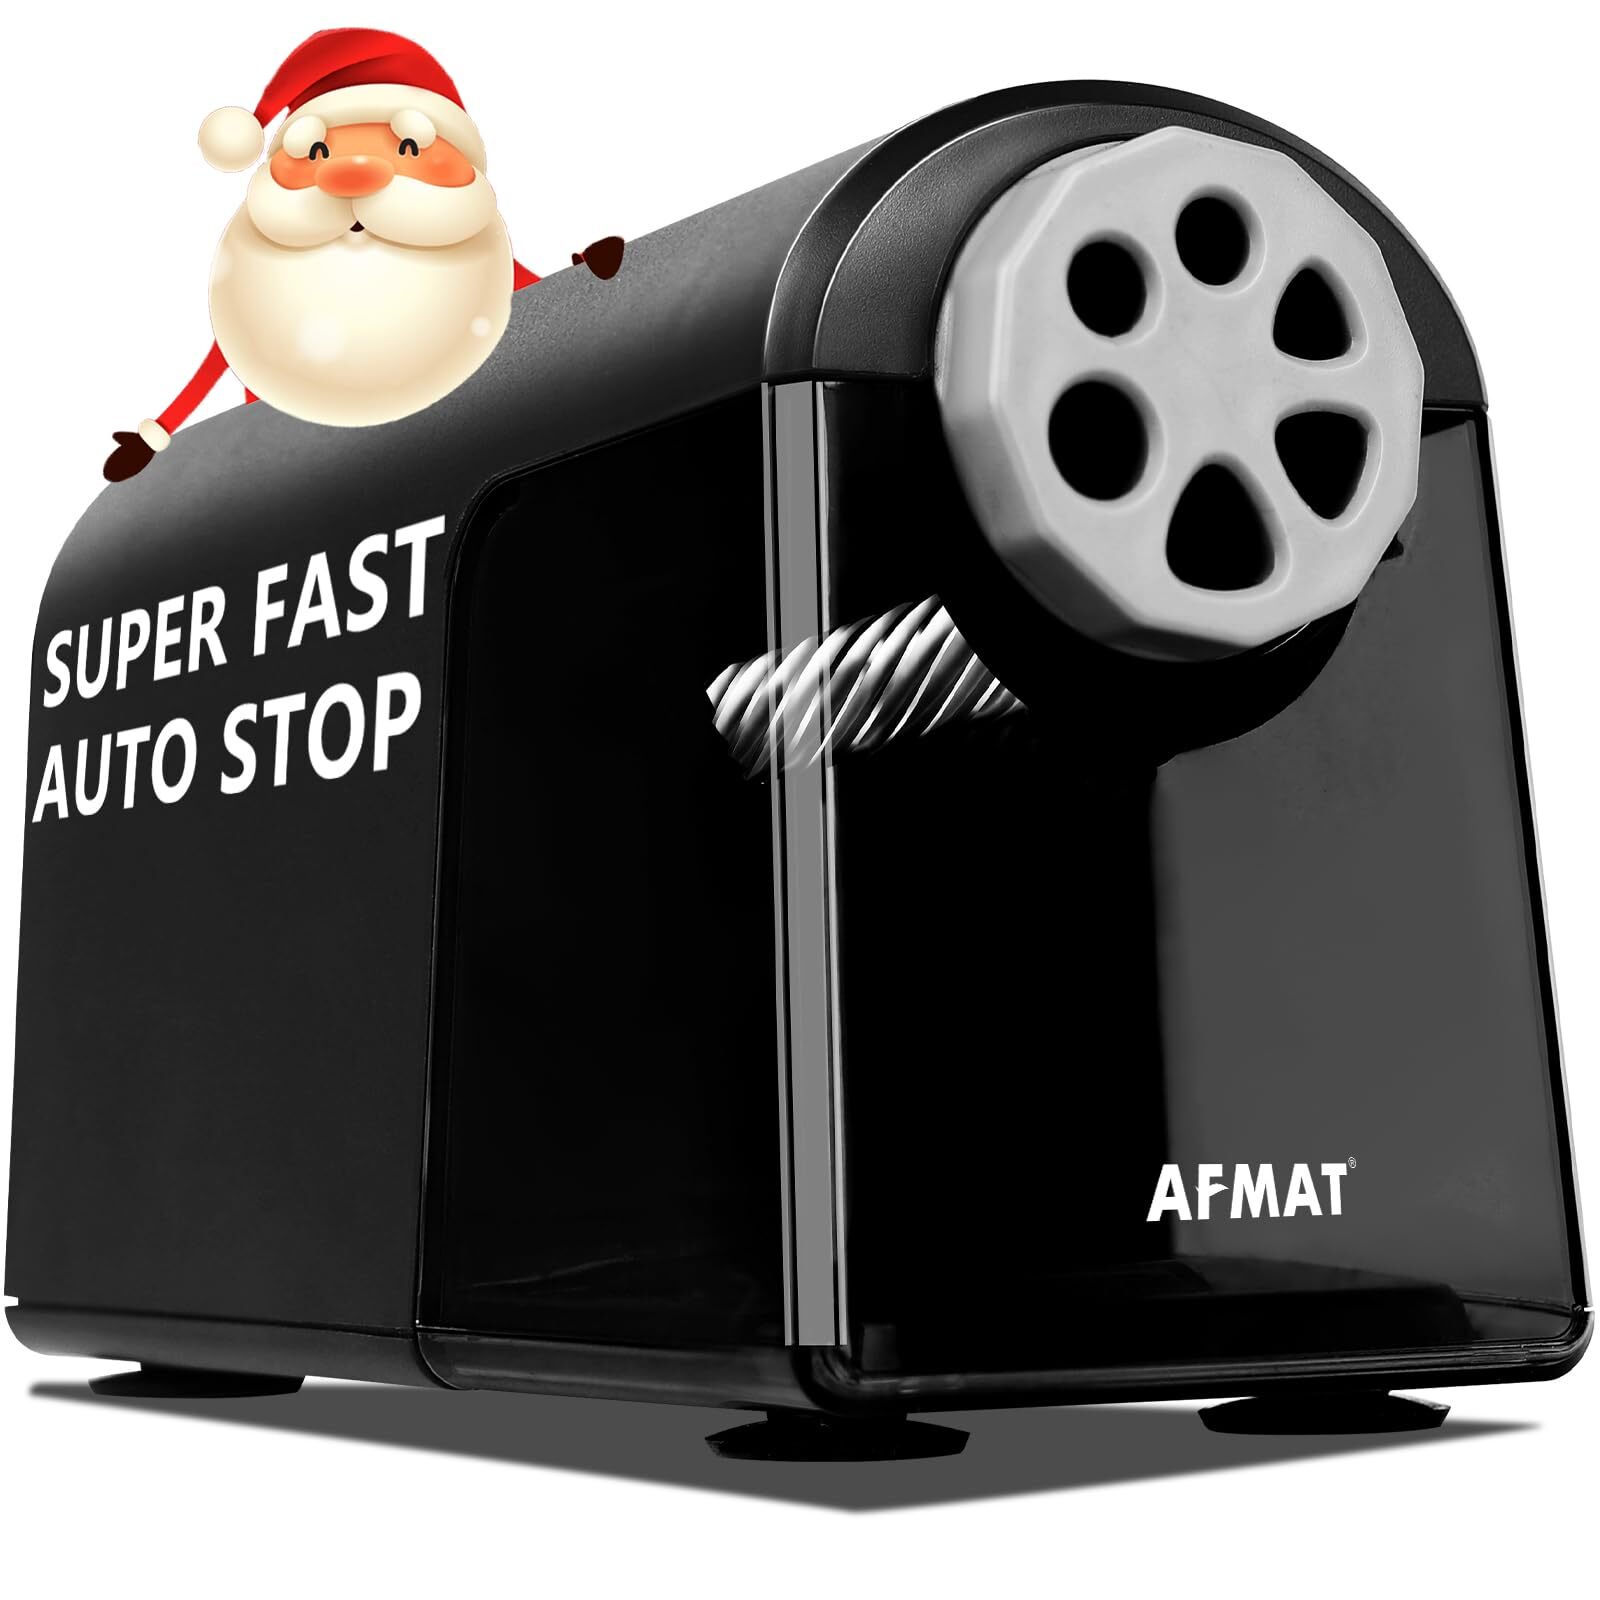 AFMAT Heavy Duty Electric Classroom Sharpener, 6 Holes, for 6-11mm Pencils, Auto Stop, Super Fast, Never Eat Pencils, School Teacher Must Have, Plug in, Black (Christmas Gift for Teachers/Students)